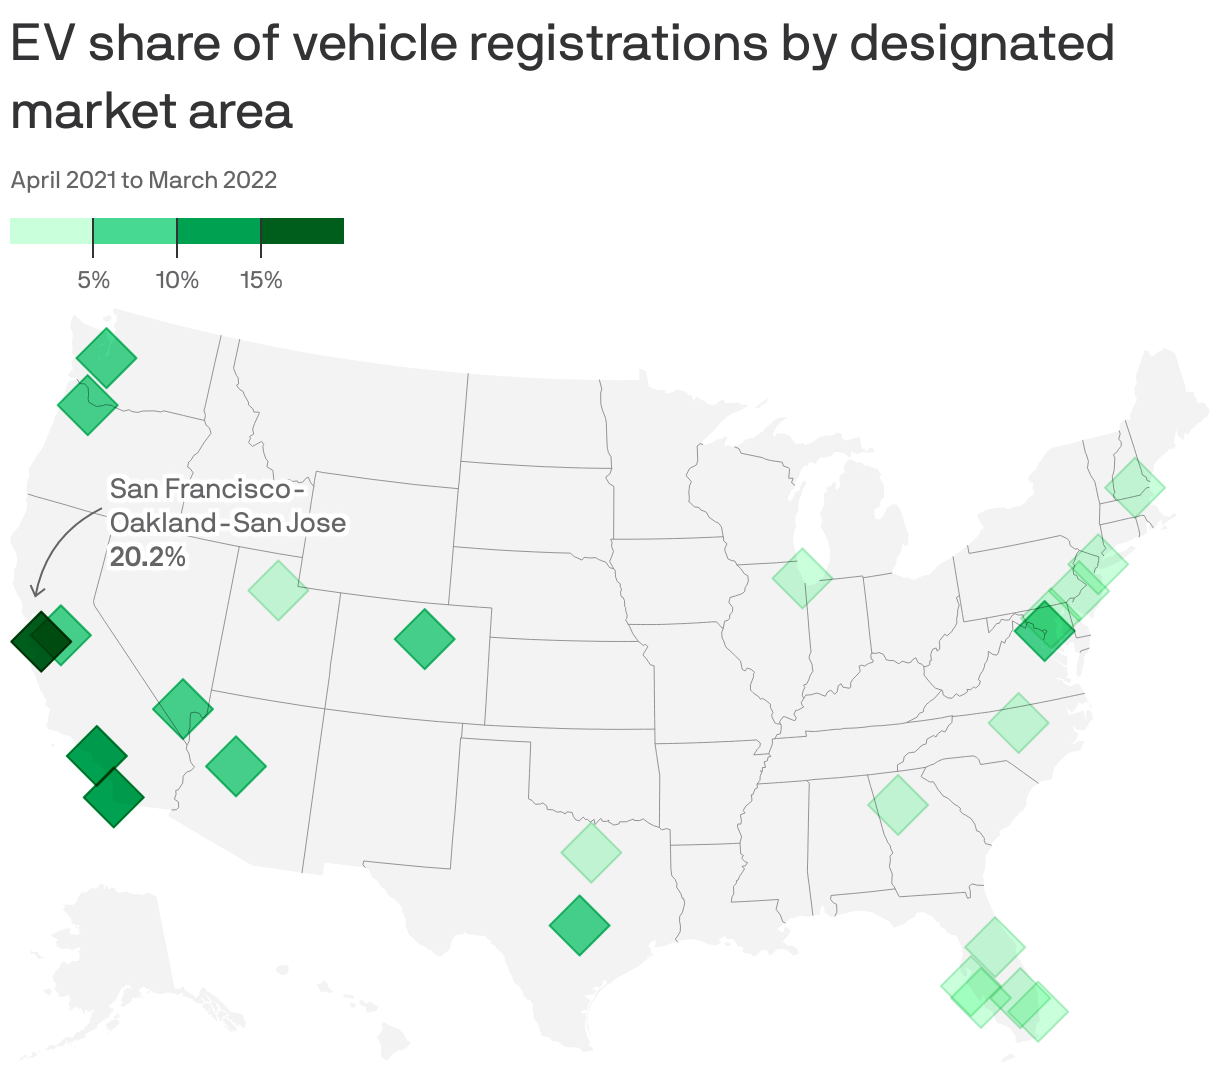 EV share of vehicle registrations by designated market area